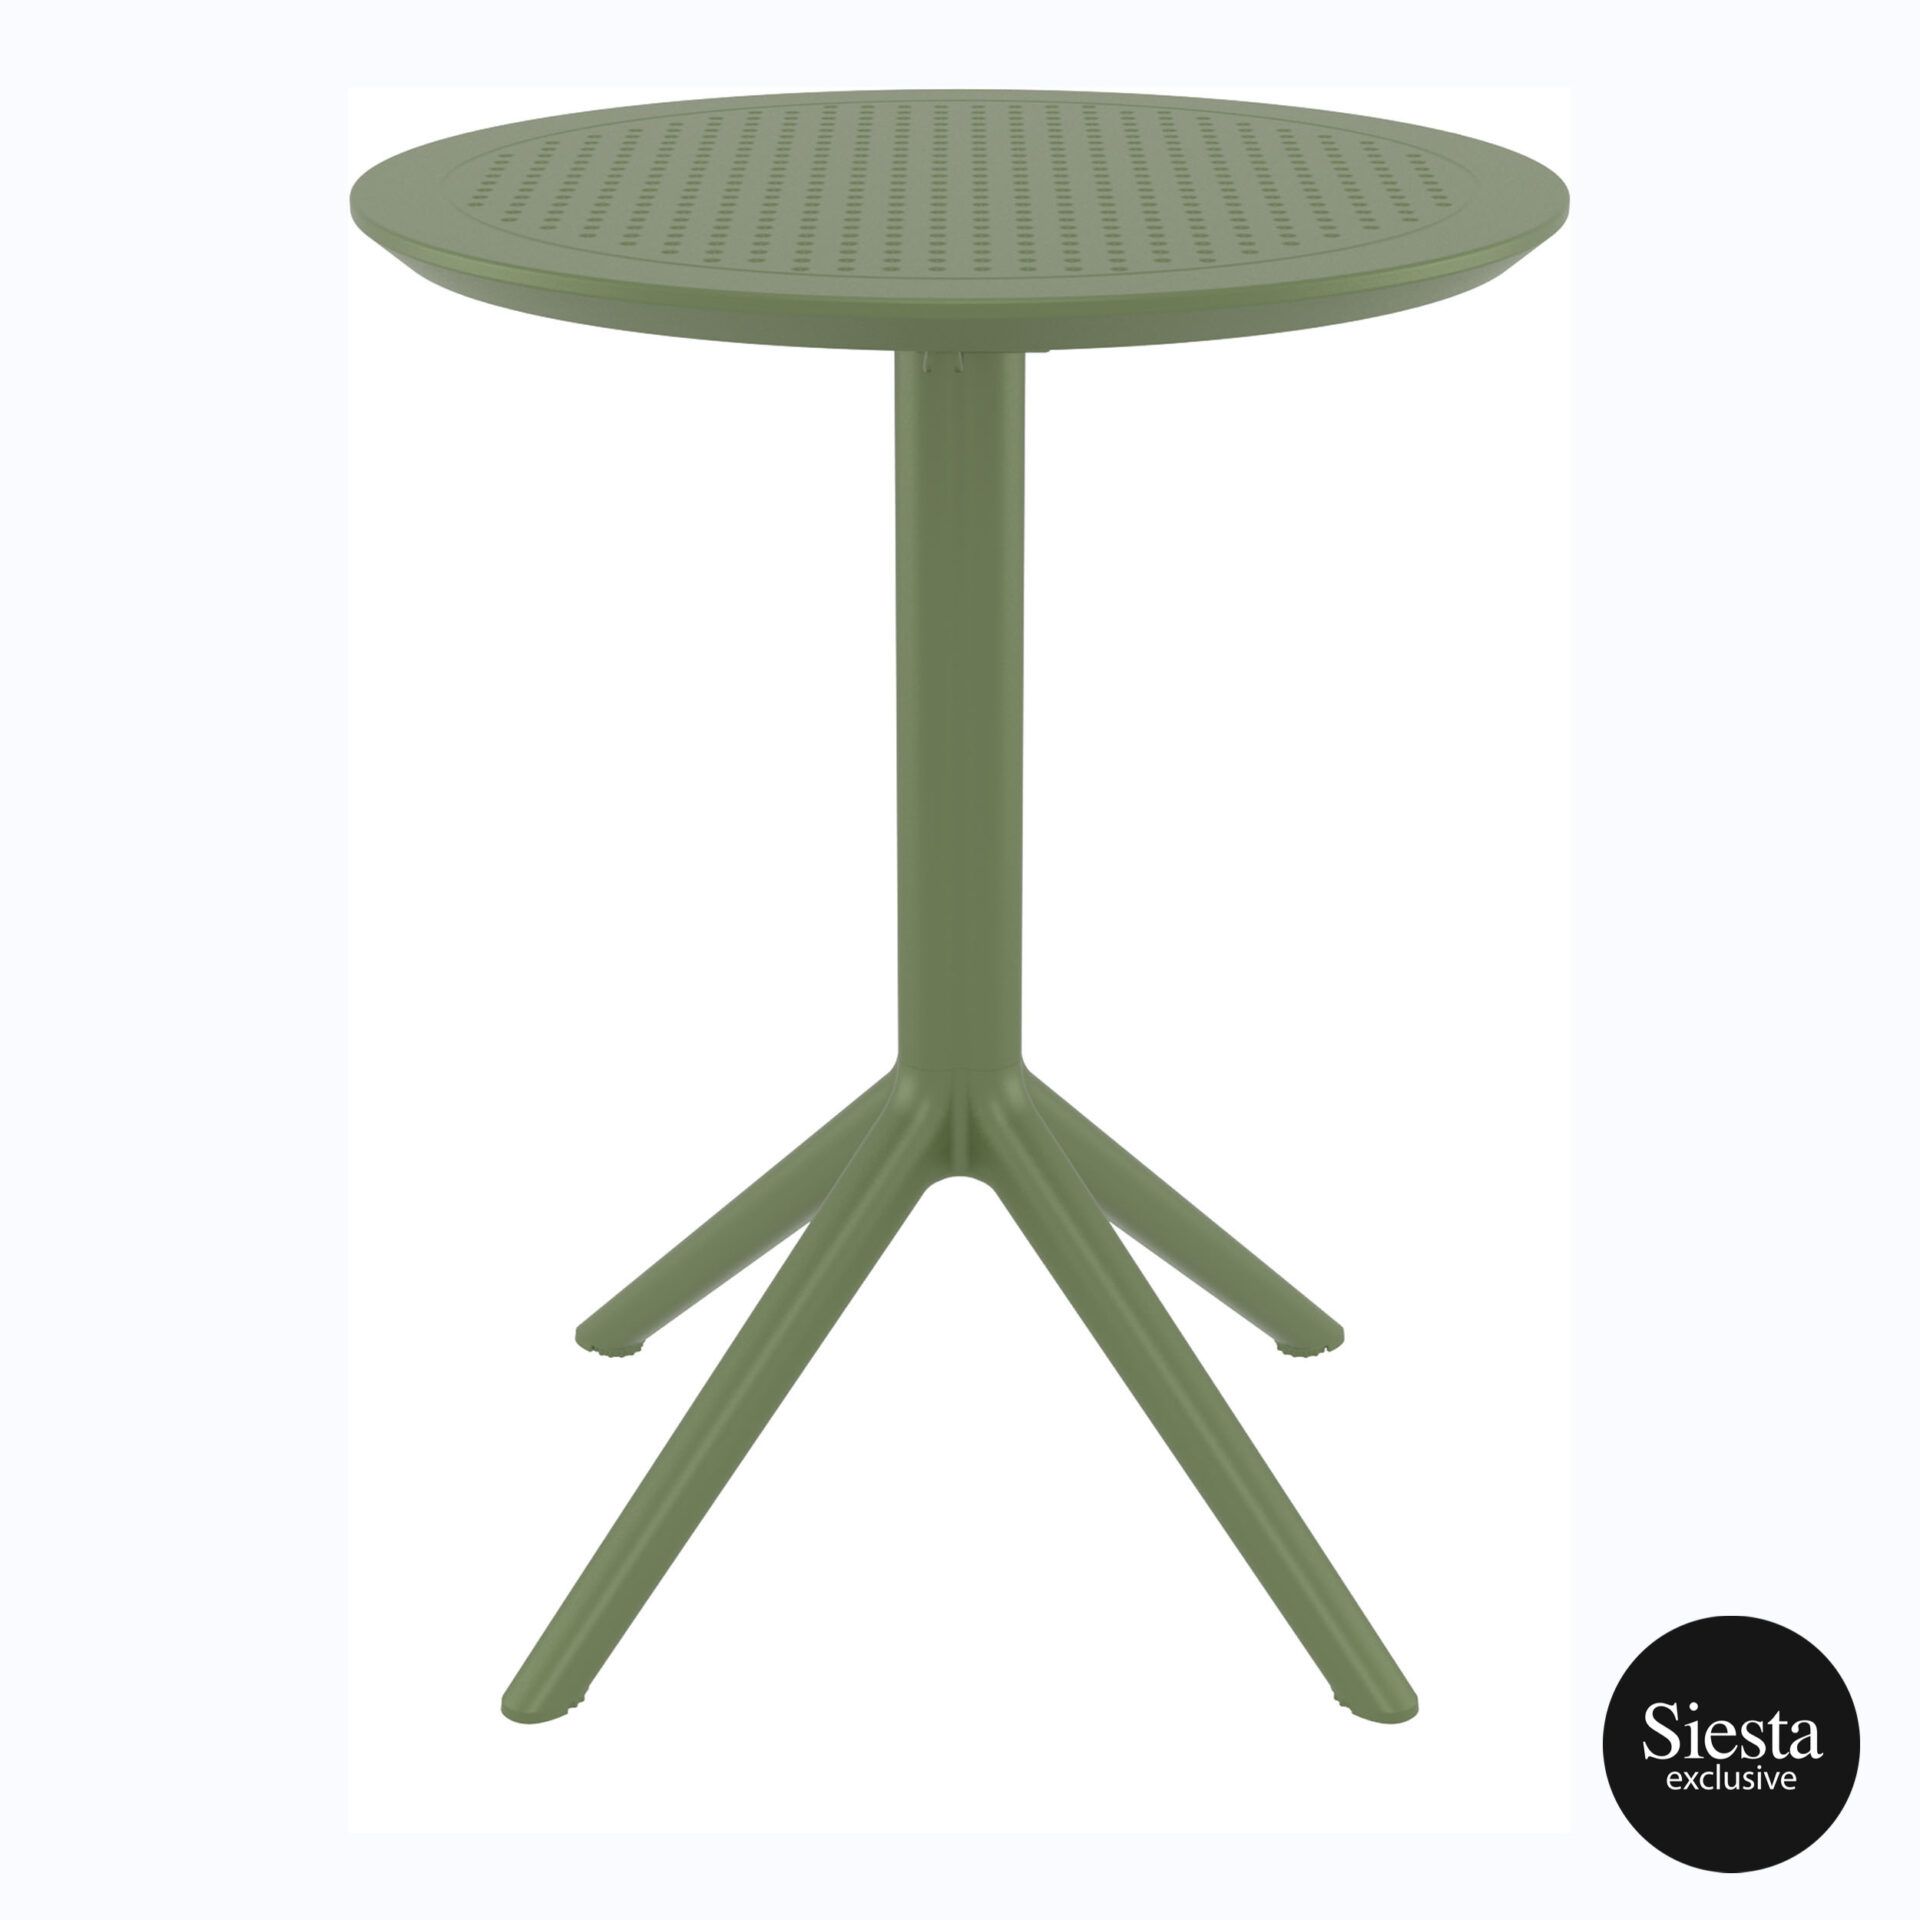 Sky Folding Table 60 Round - Olive Green